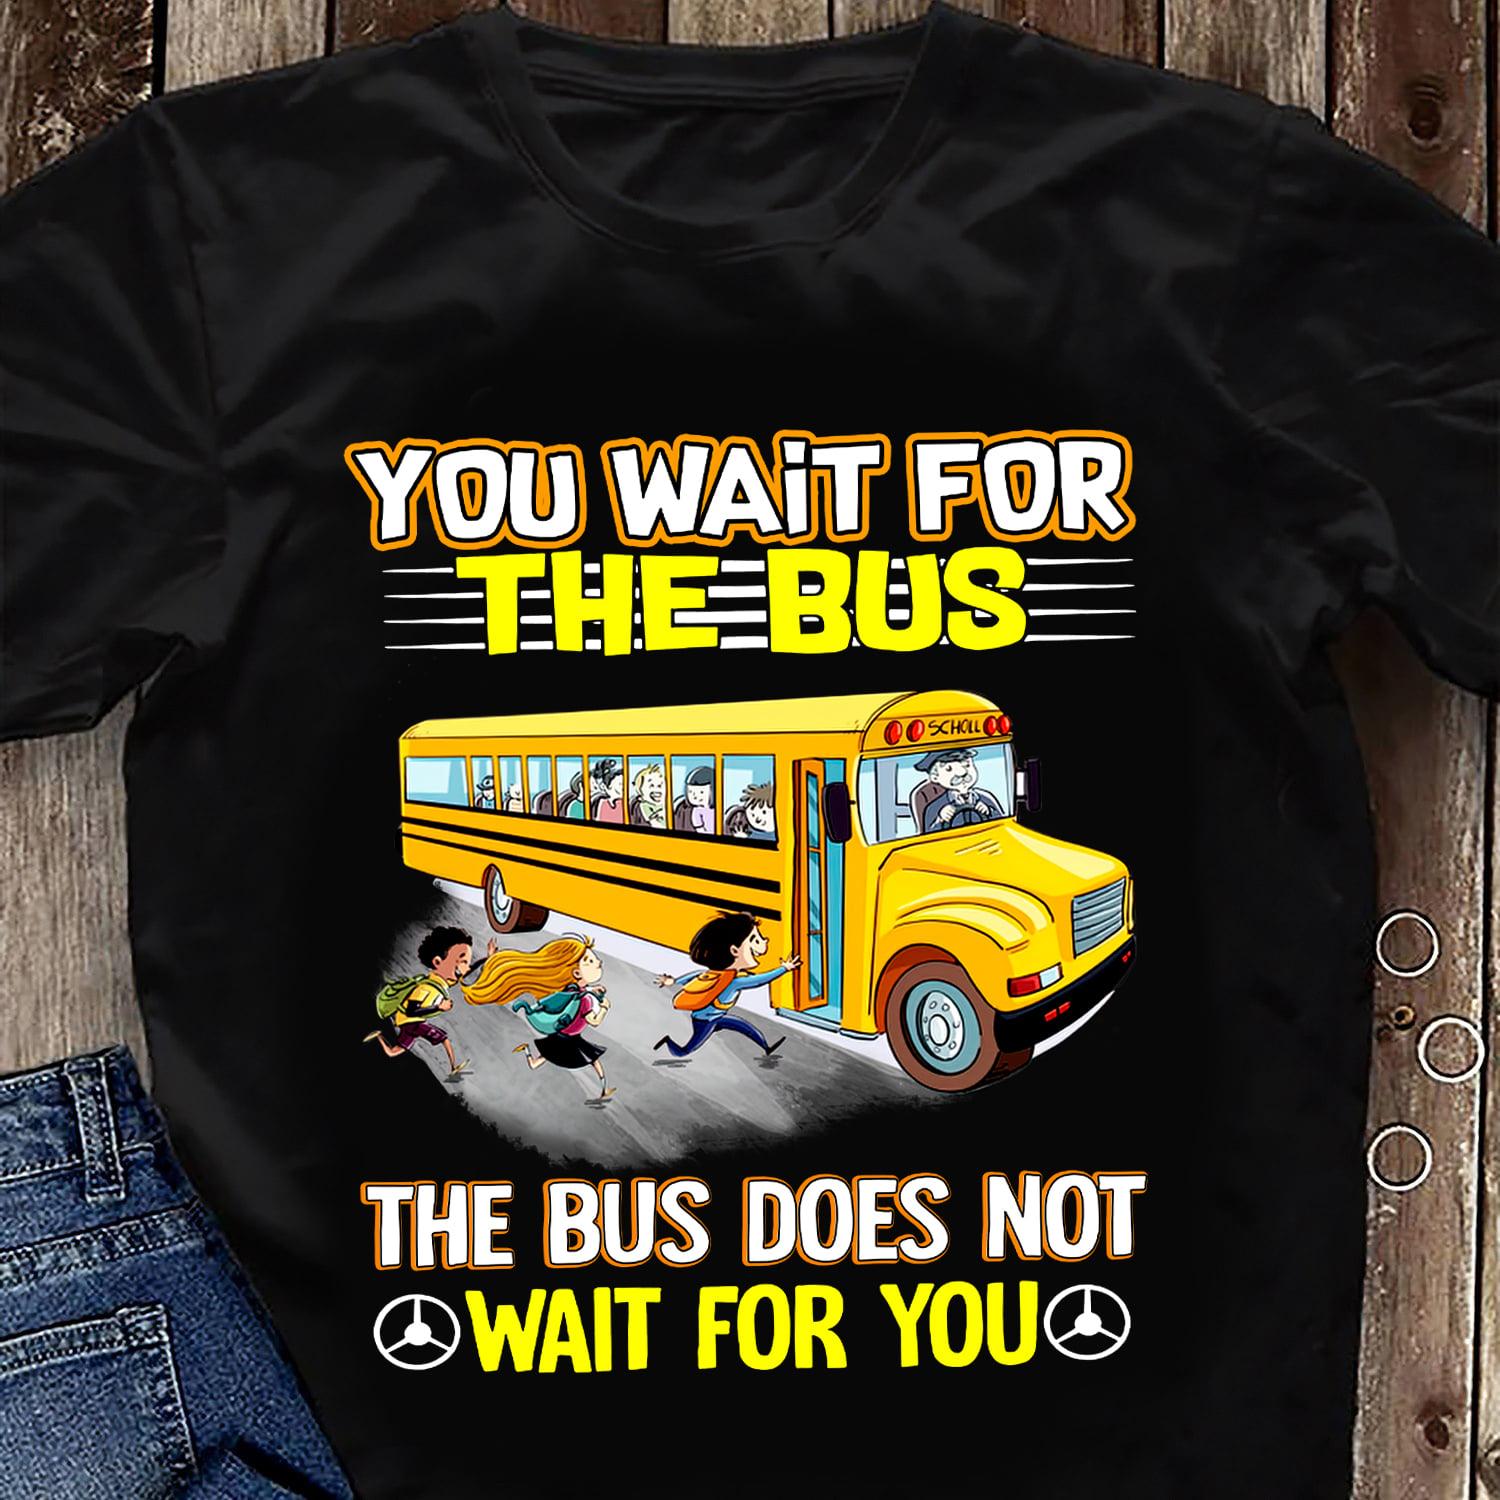 You wait for the bus, the bus does not wait for you - School bus driver, rush the bus